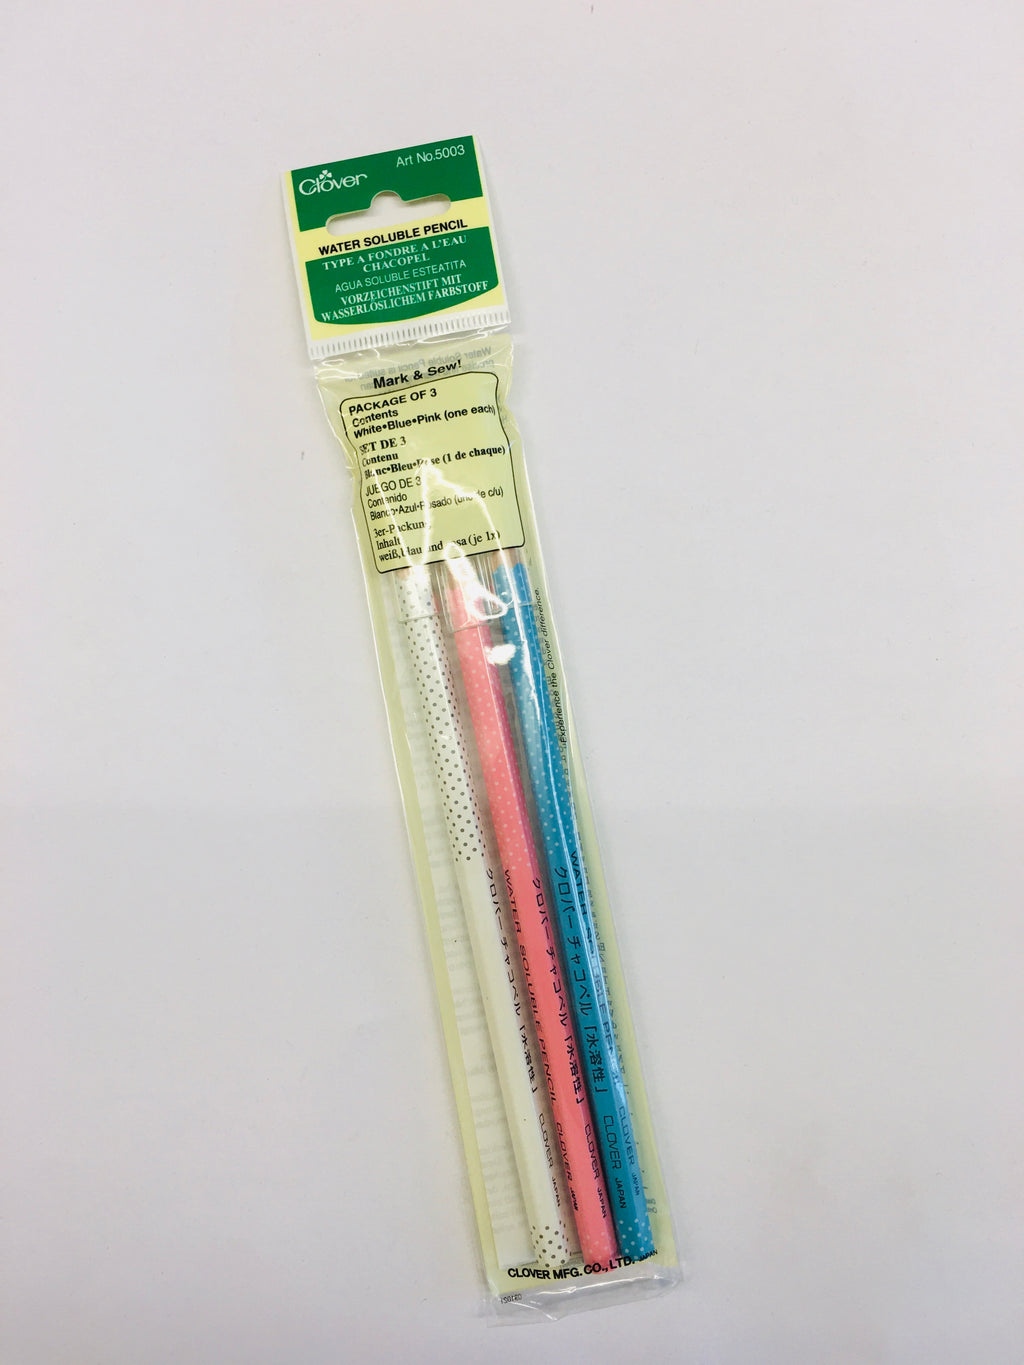 Clover Water Soluble Pencil Three Pack